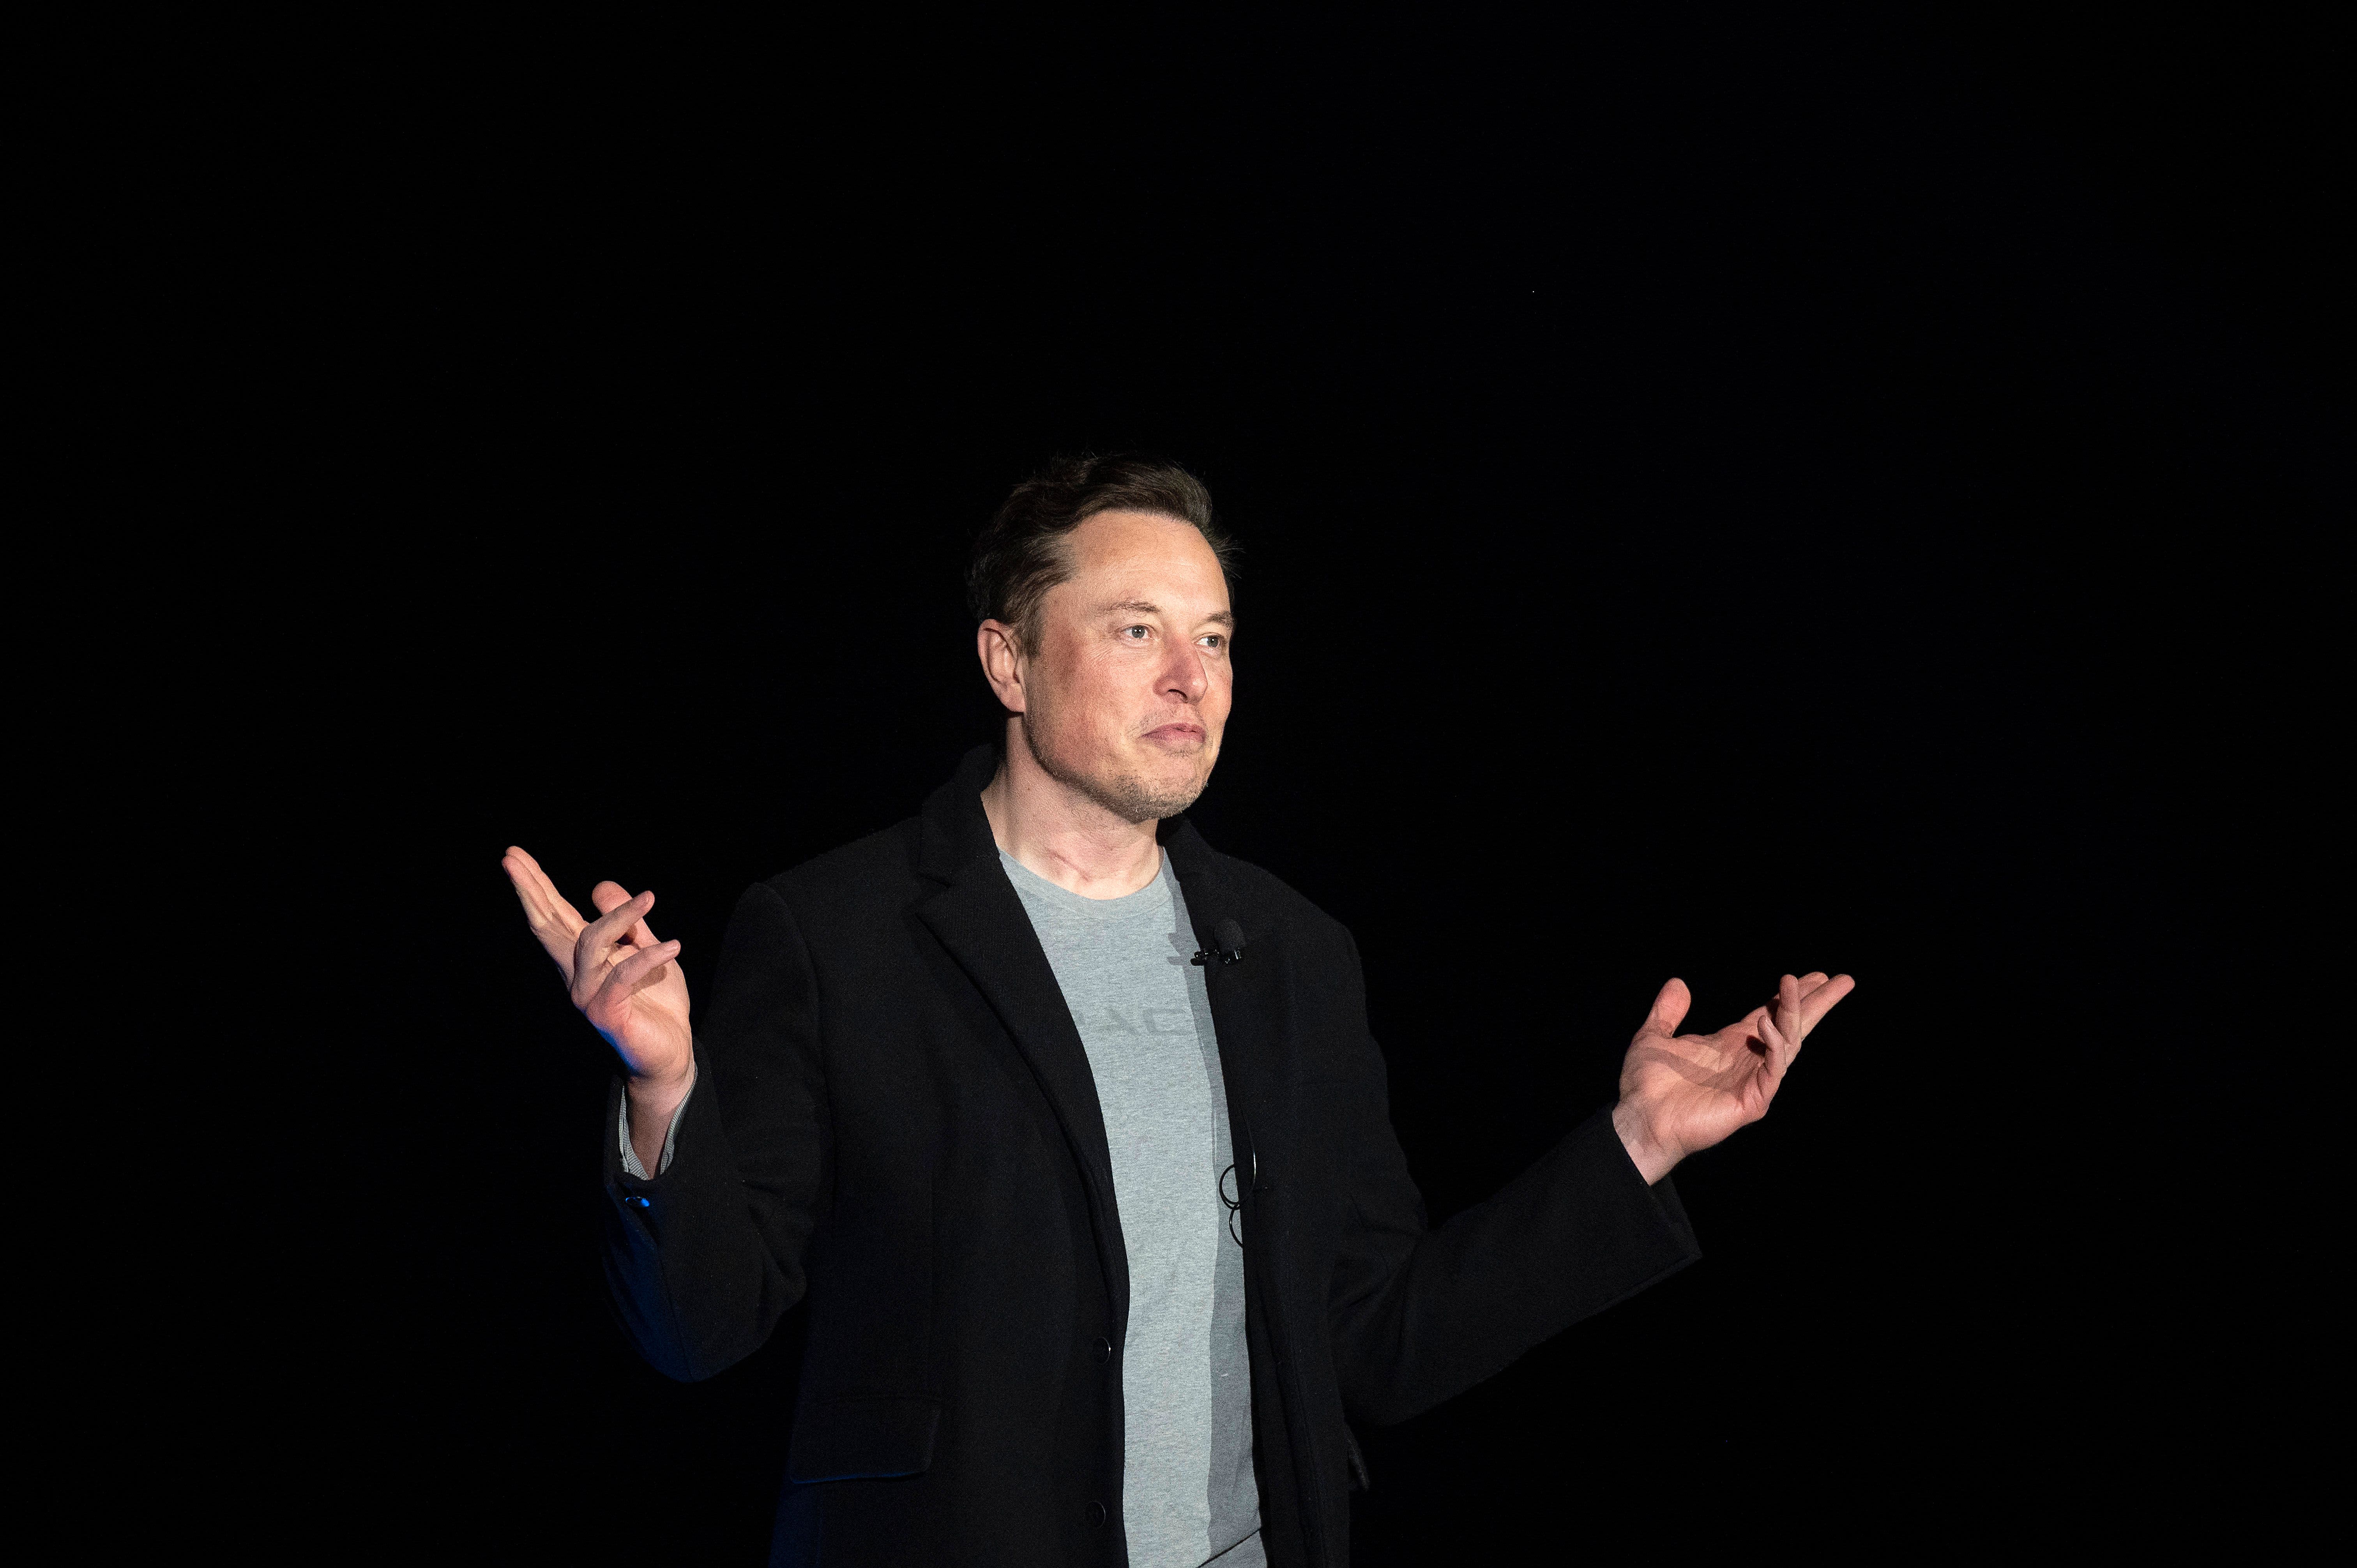 Musk Aims to Ease Concerns in Address to Twitter Workers